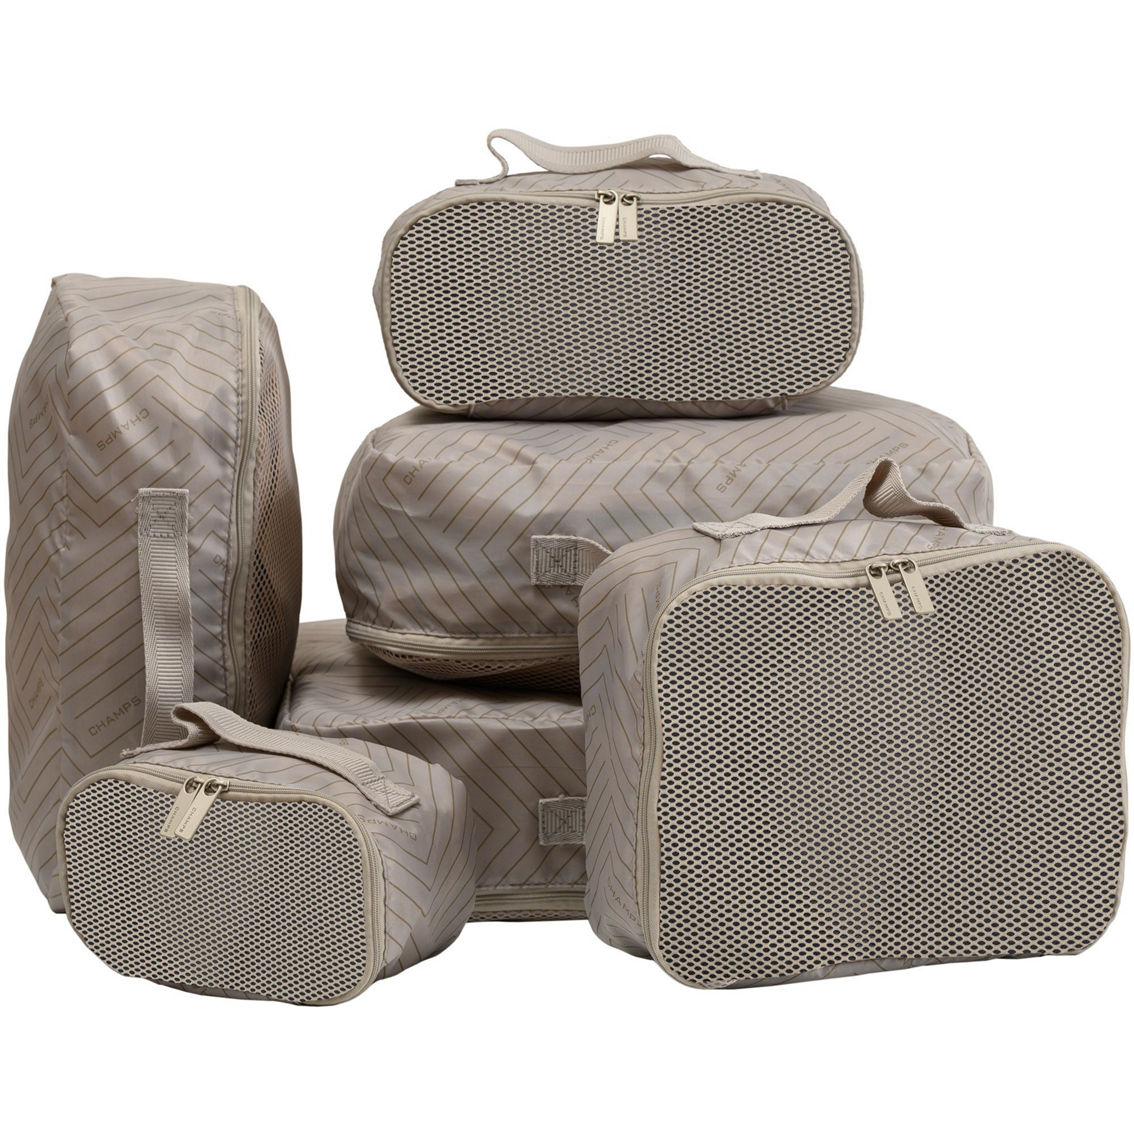 CHAMPS Packing Cubes-6 Piece Set - Image 4 of 5